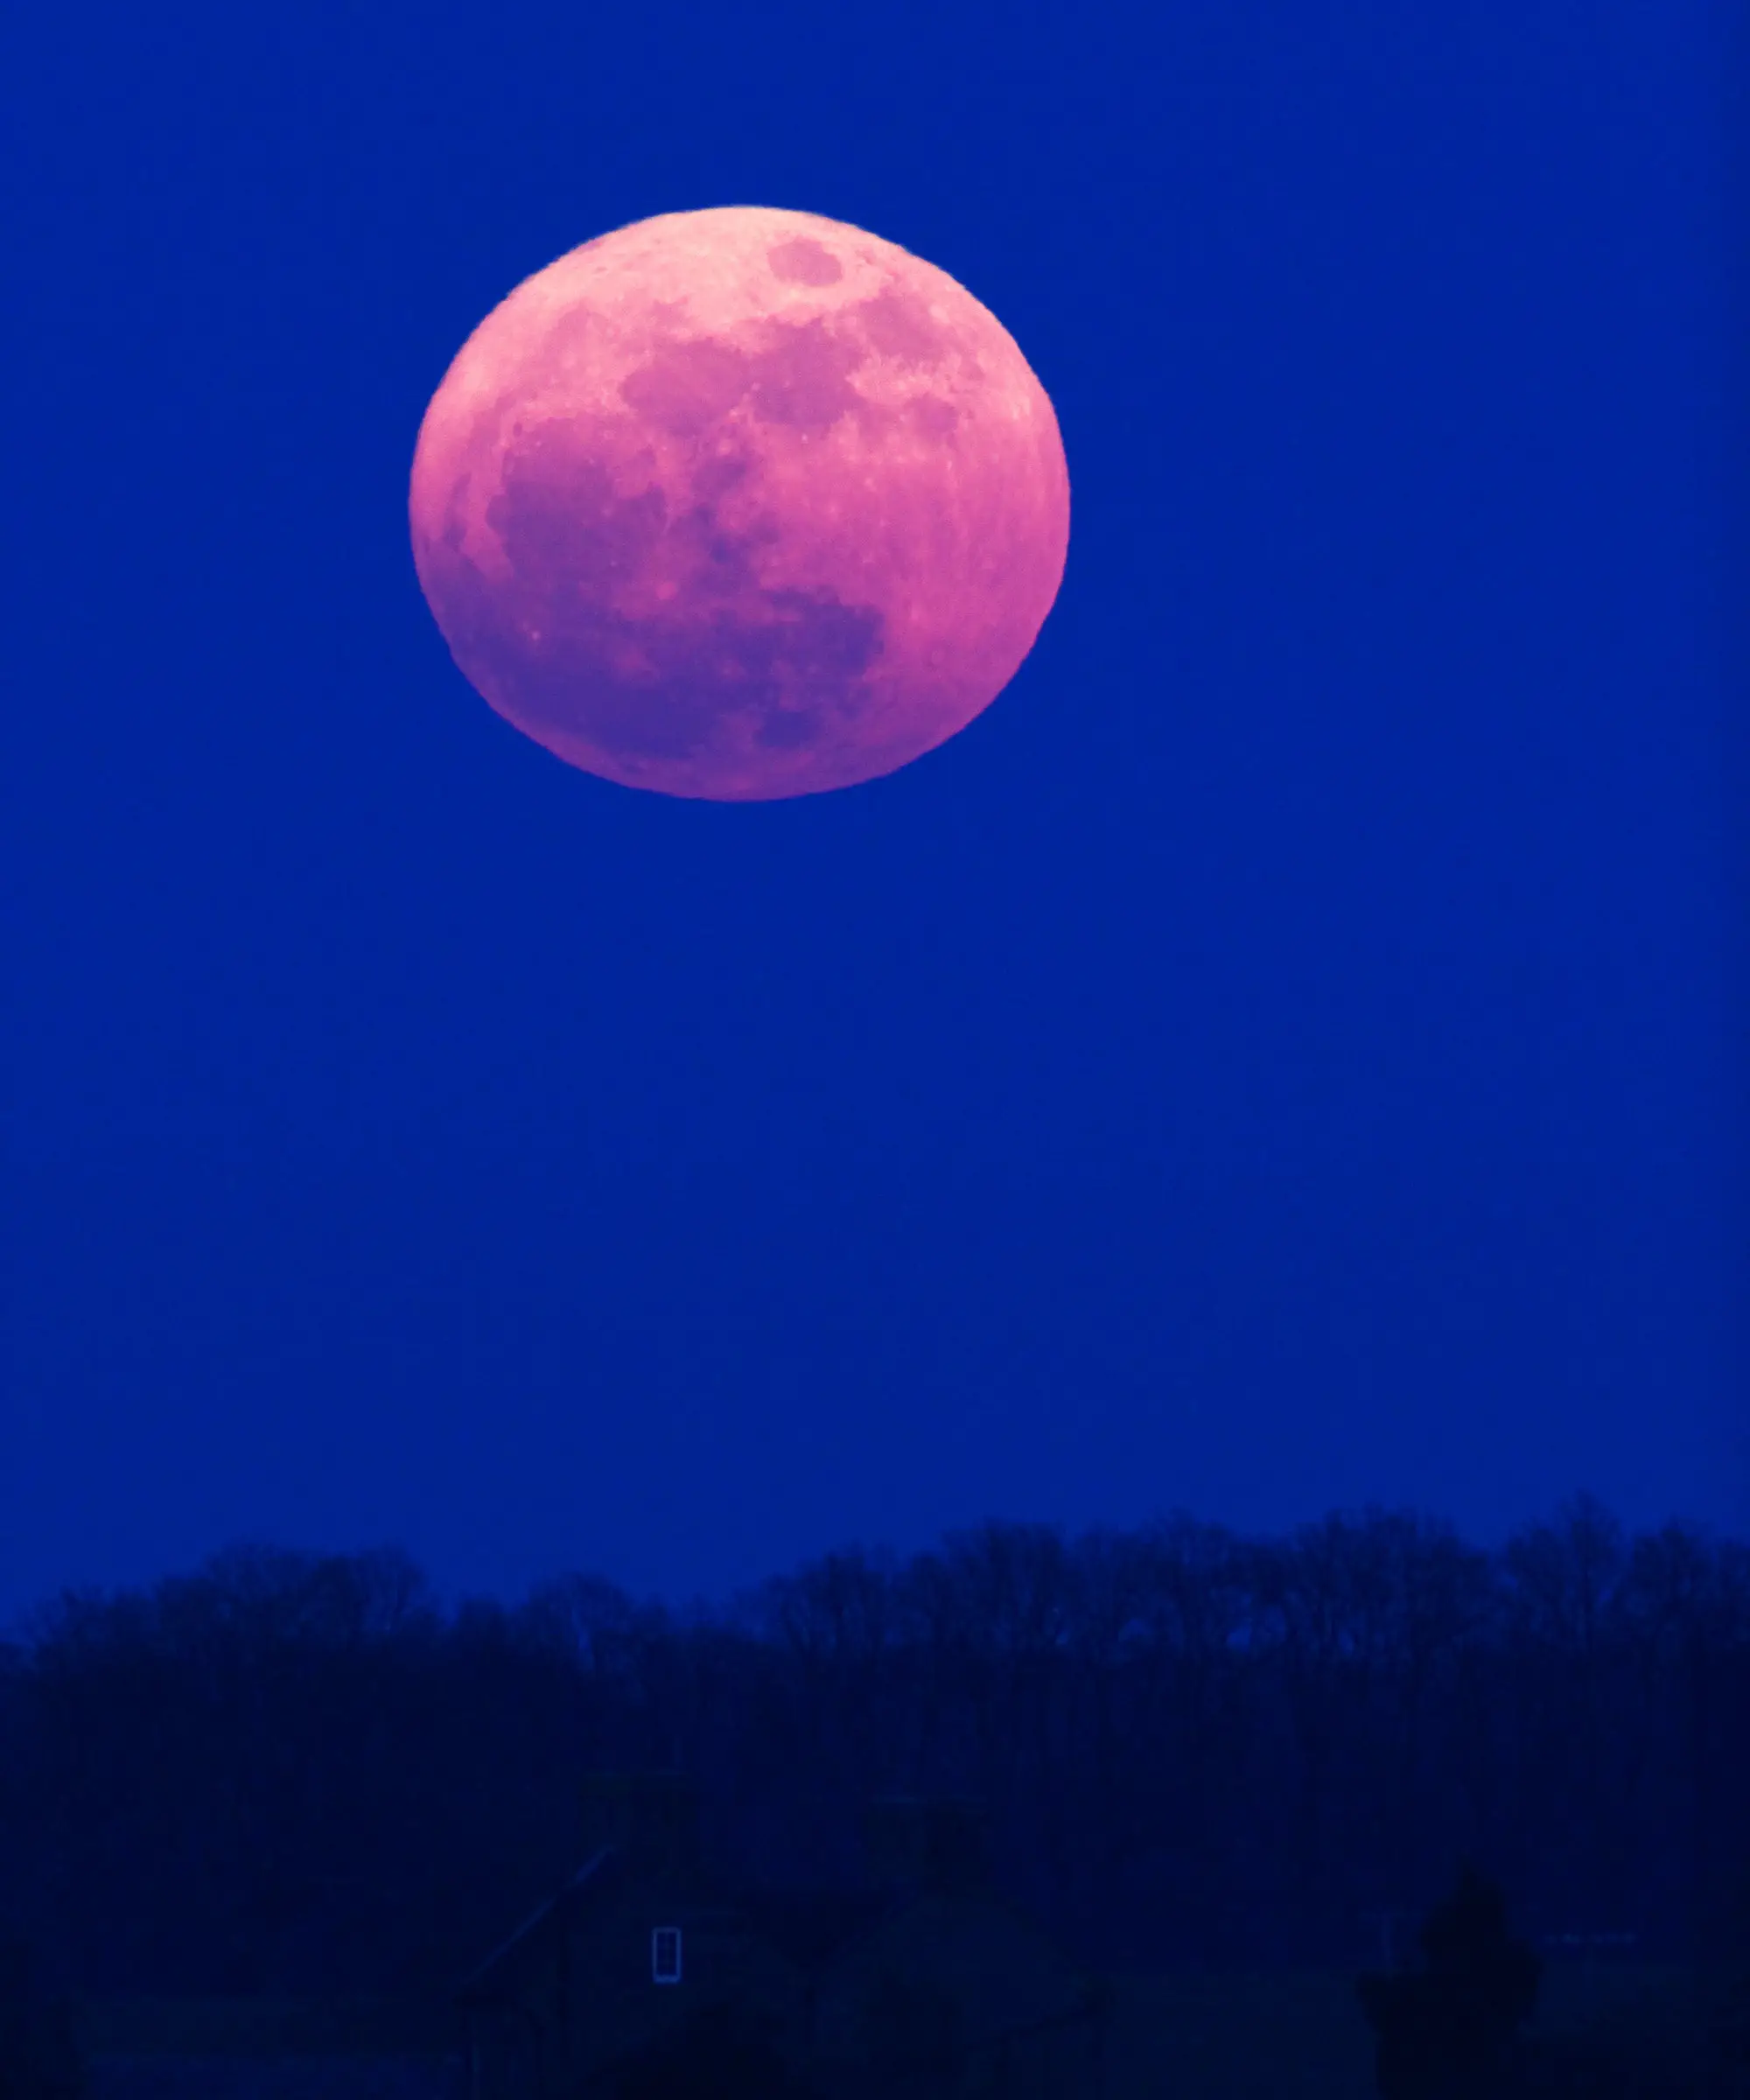 What Is The Pink Moon?